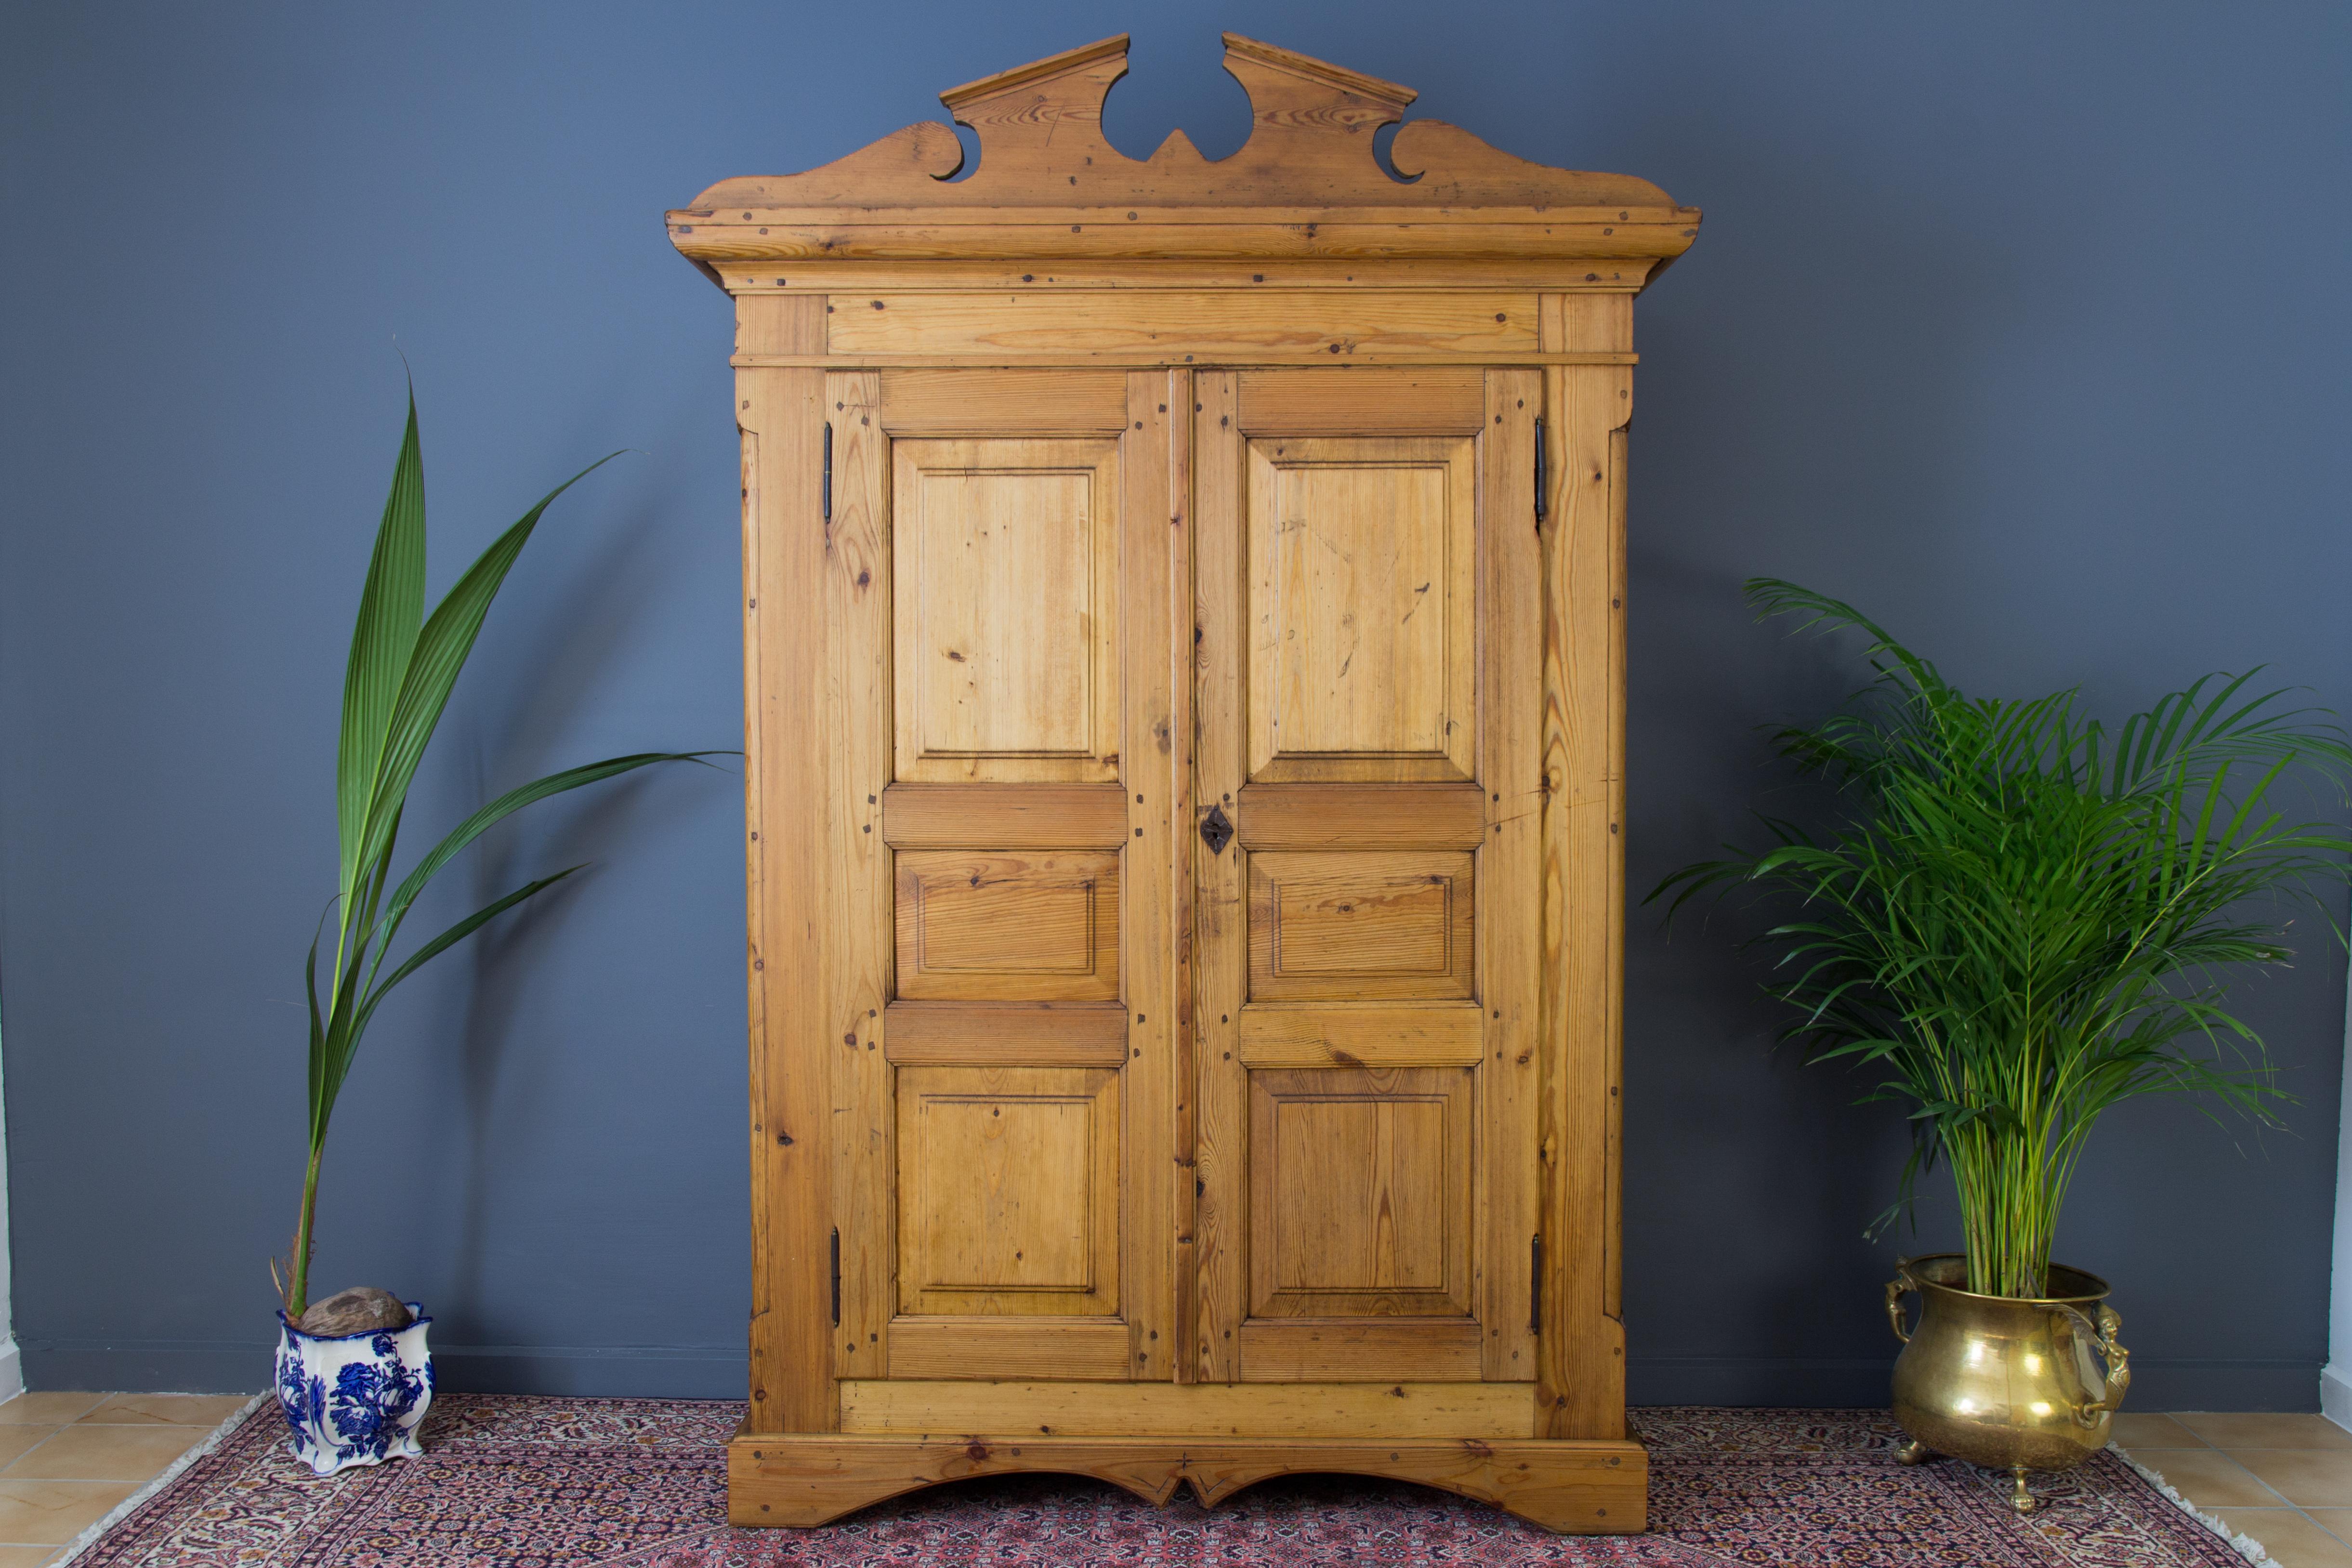 Beautiful early 20th century two-door armoire of Baltic Pine. This antique wardrobe has three shelves in each side. The wardrobe is in one piece and is of very solid construction and in very good antique condition. Please expect some dents, marks